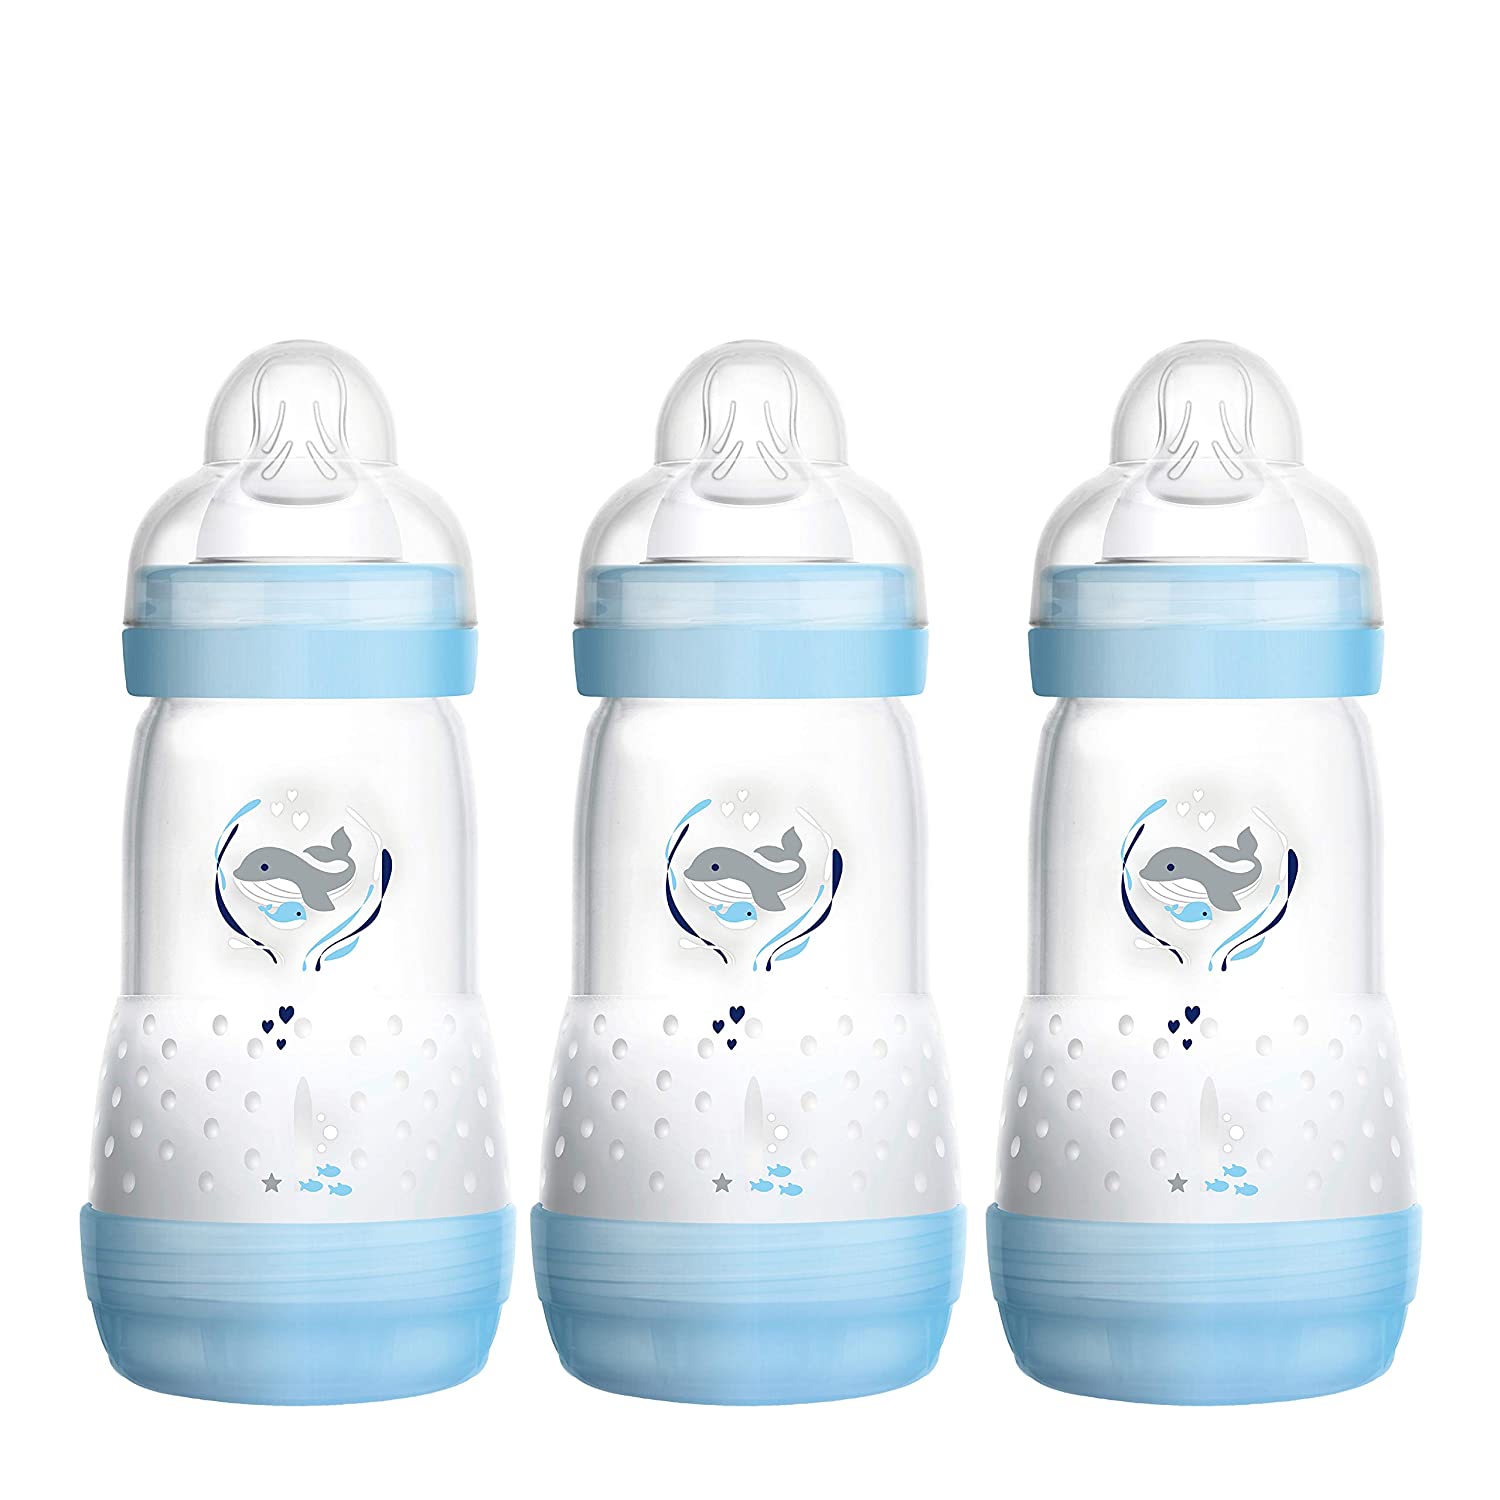 MAM Easy Start anti-colic baby bottle (160 ml), milk bottle with innovative base valve to prevent colic, baby’s drinking bottle with size 1 teat, from birth, bear